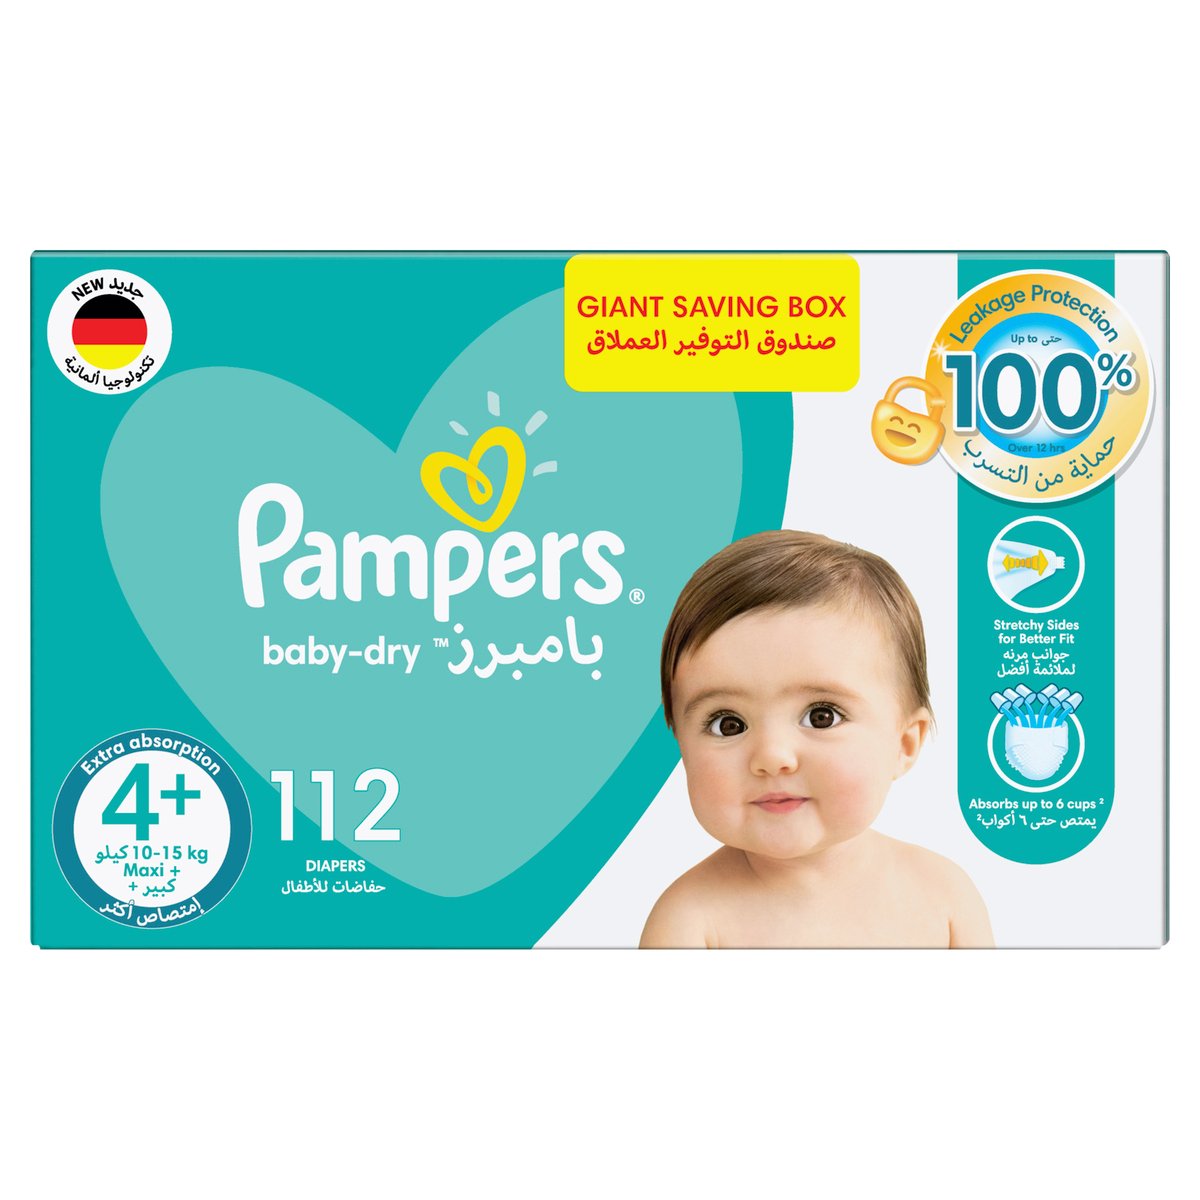 Pampers Baby-Dry Diapers Size 4+ 10-15kg with Leakage Protection 112pcs